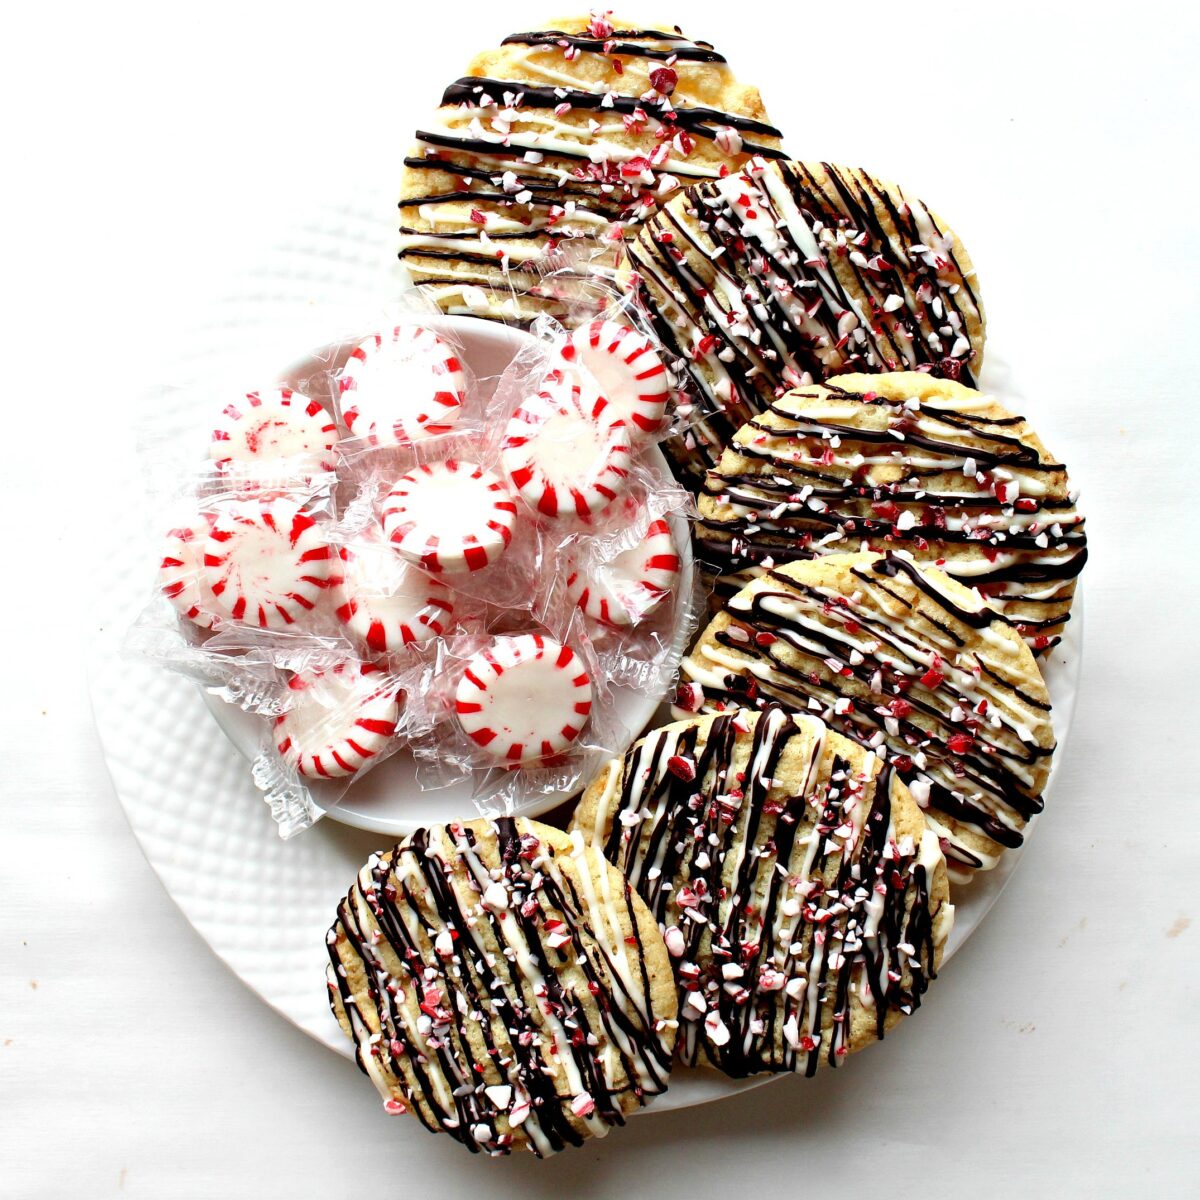  Cookies decorated with chocolate drizzles and candy bits on a white plate. 